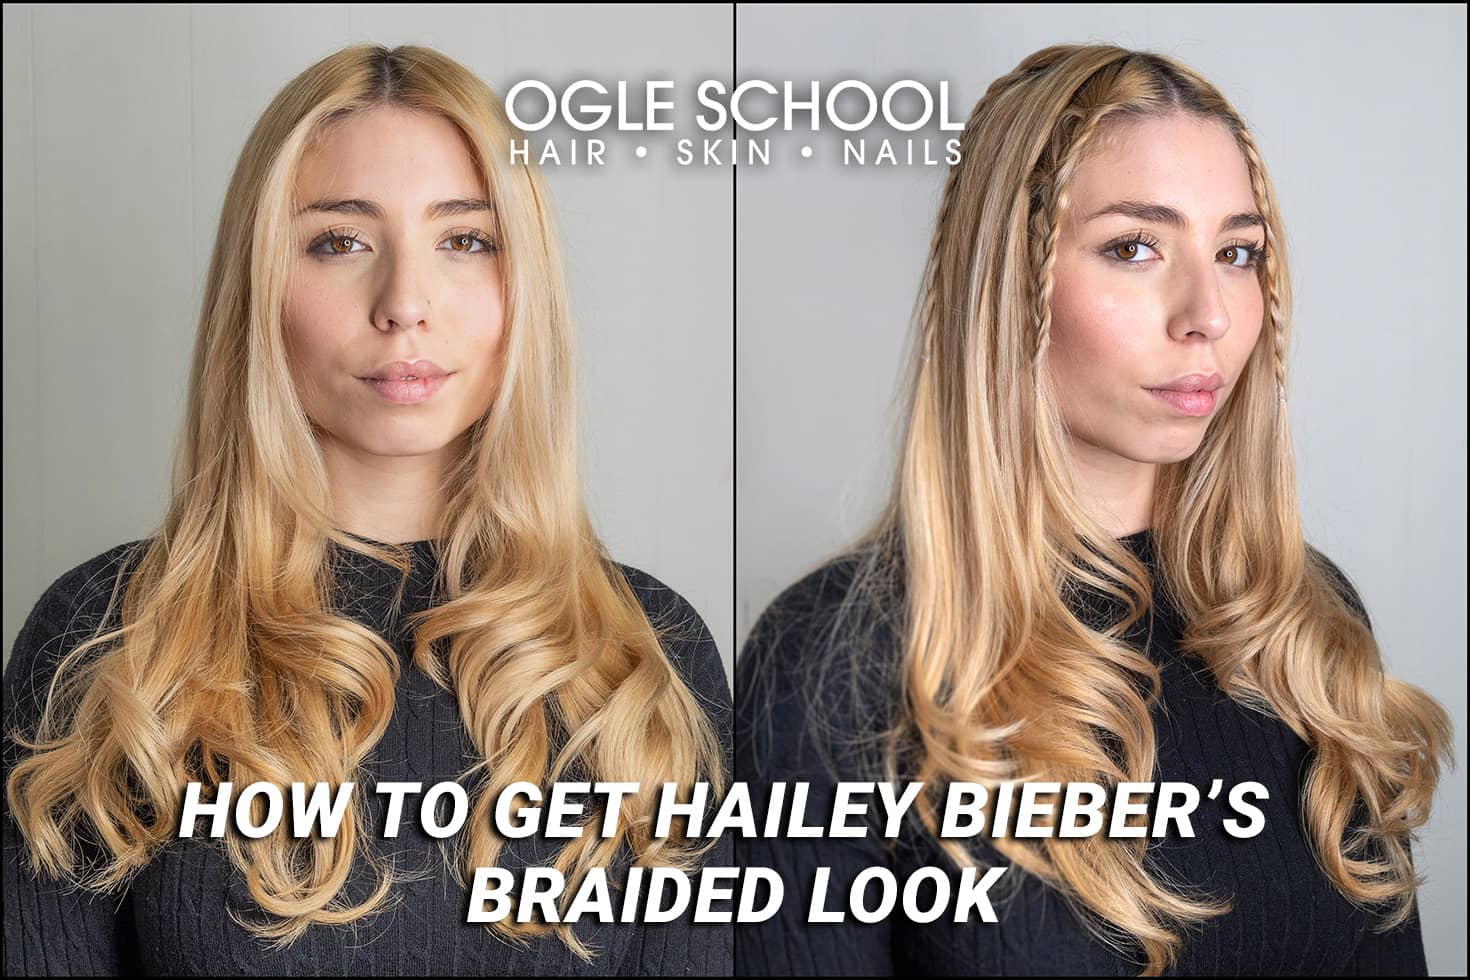 How to Get Hailey Bieber's Braided Look